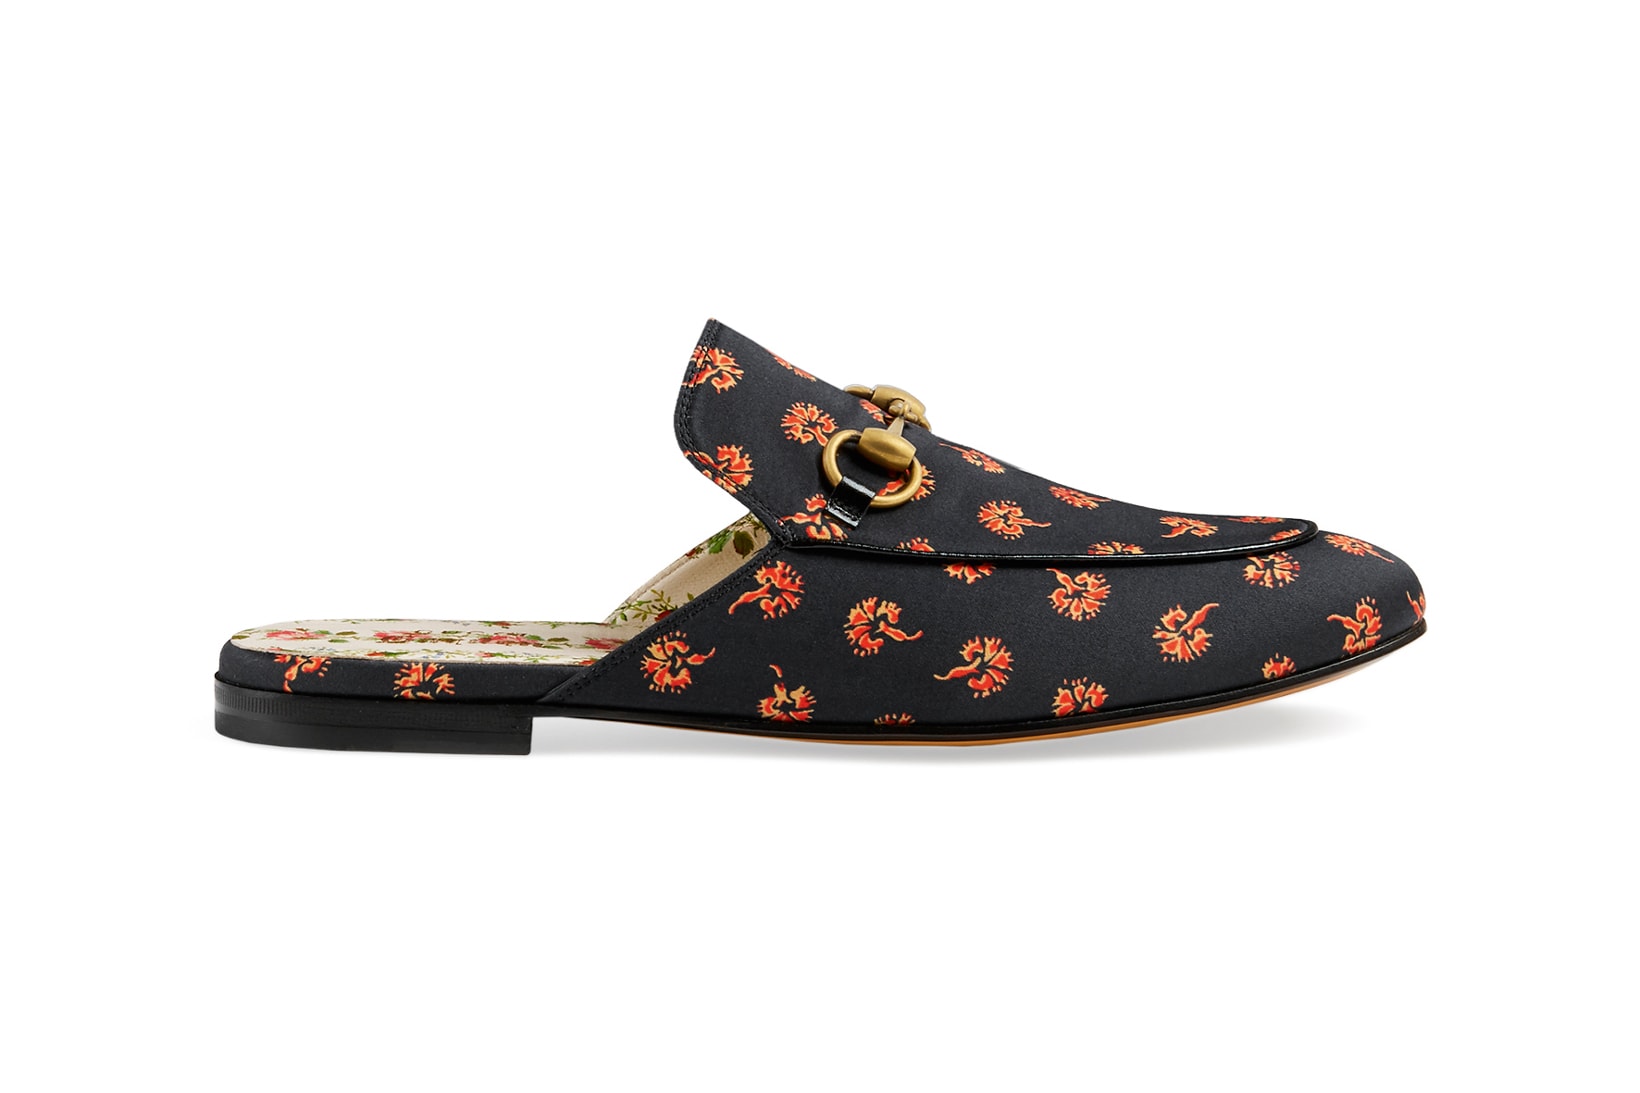 Gucci Garden Capsule Collection Princetown Slipper Black Red